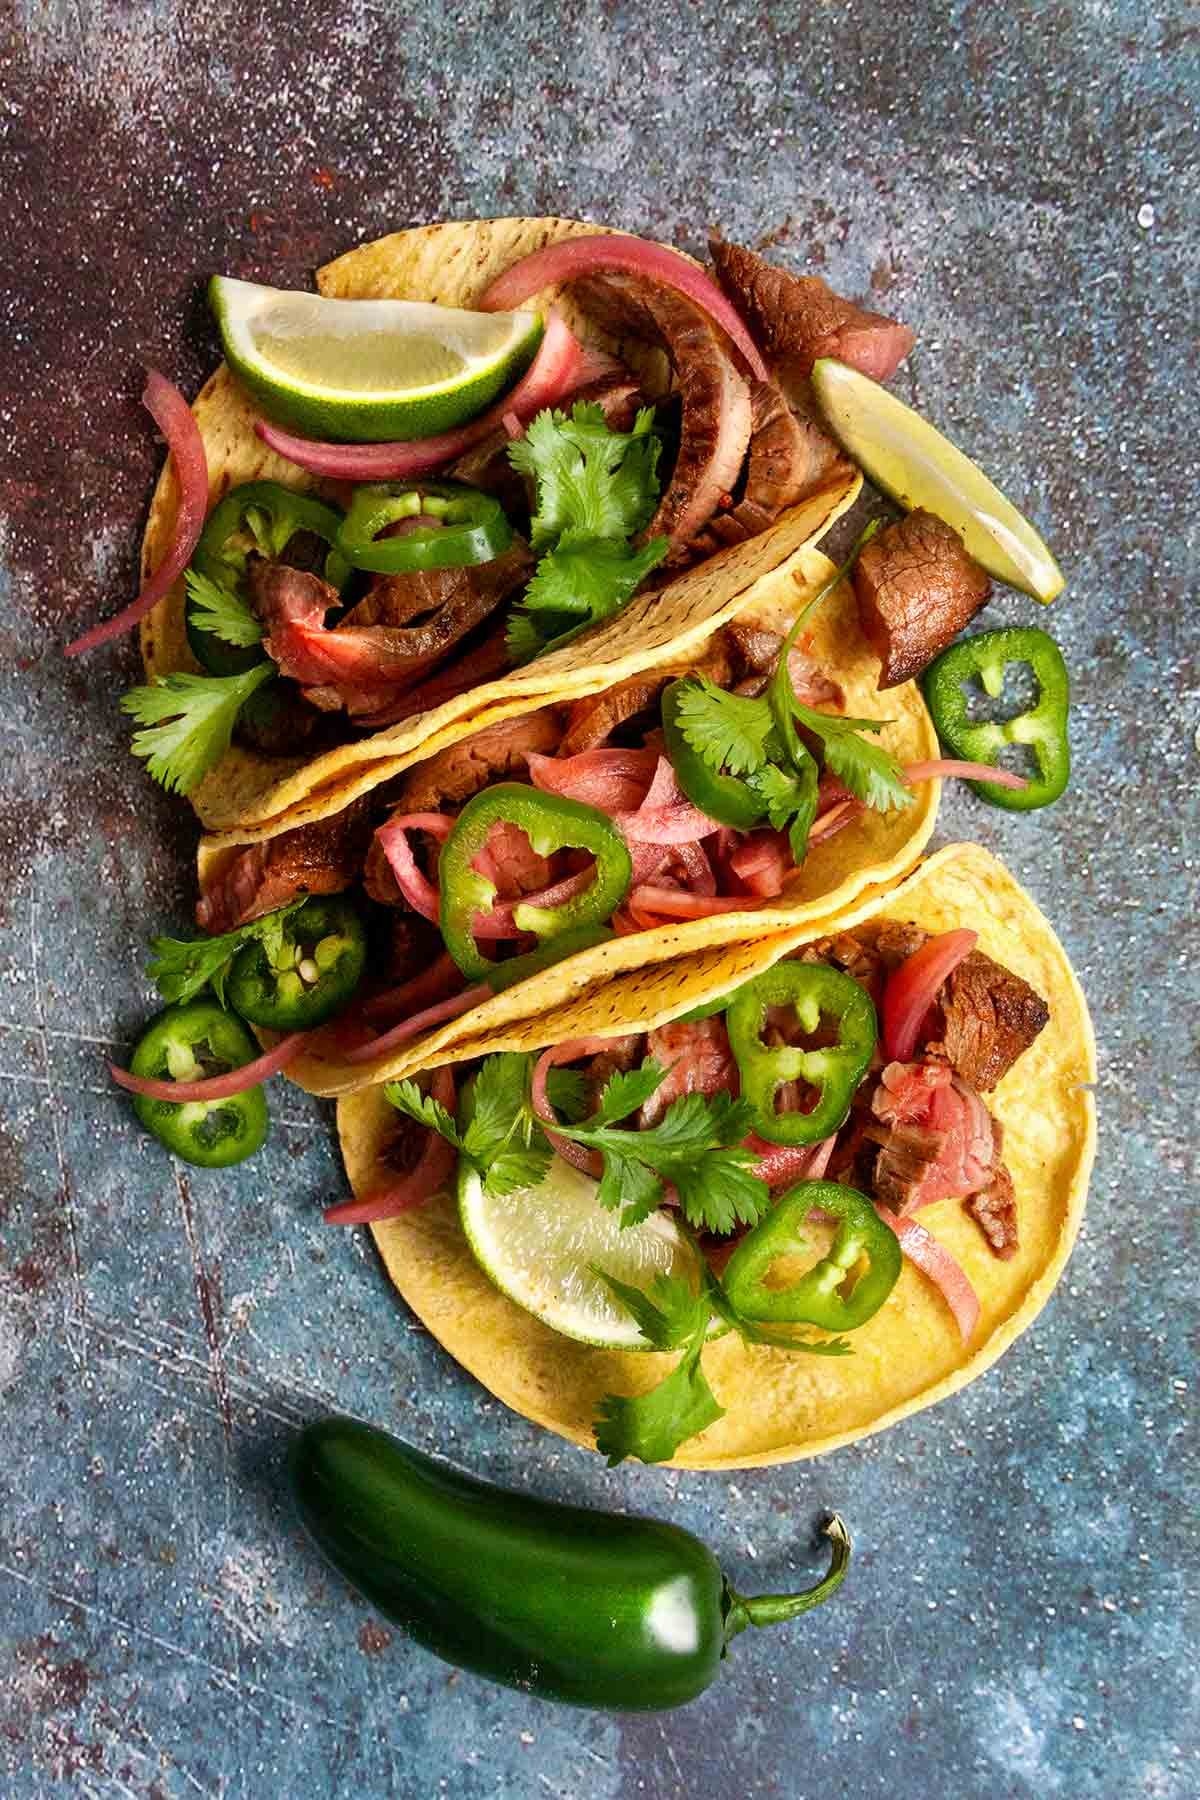 Tacos with grilled steak and sliced jalapeño and garnish with a squeeze of fresh lime, cilantro, and pickled red onions.